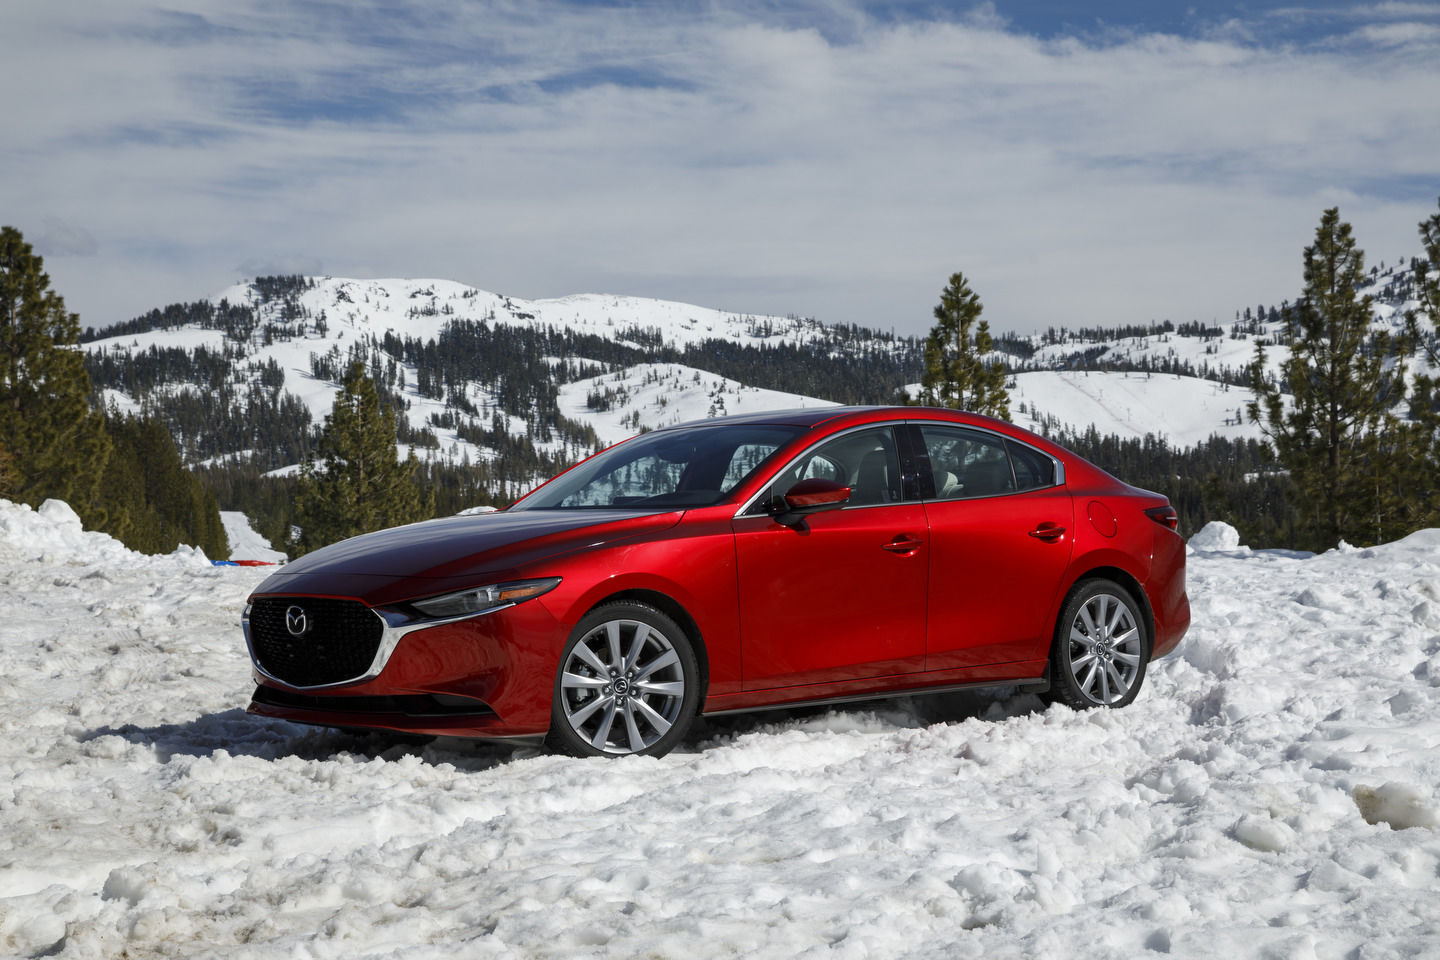 Essential Tips to Get Your Mazda Winter-Ready